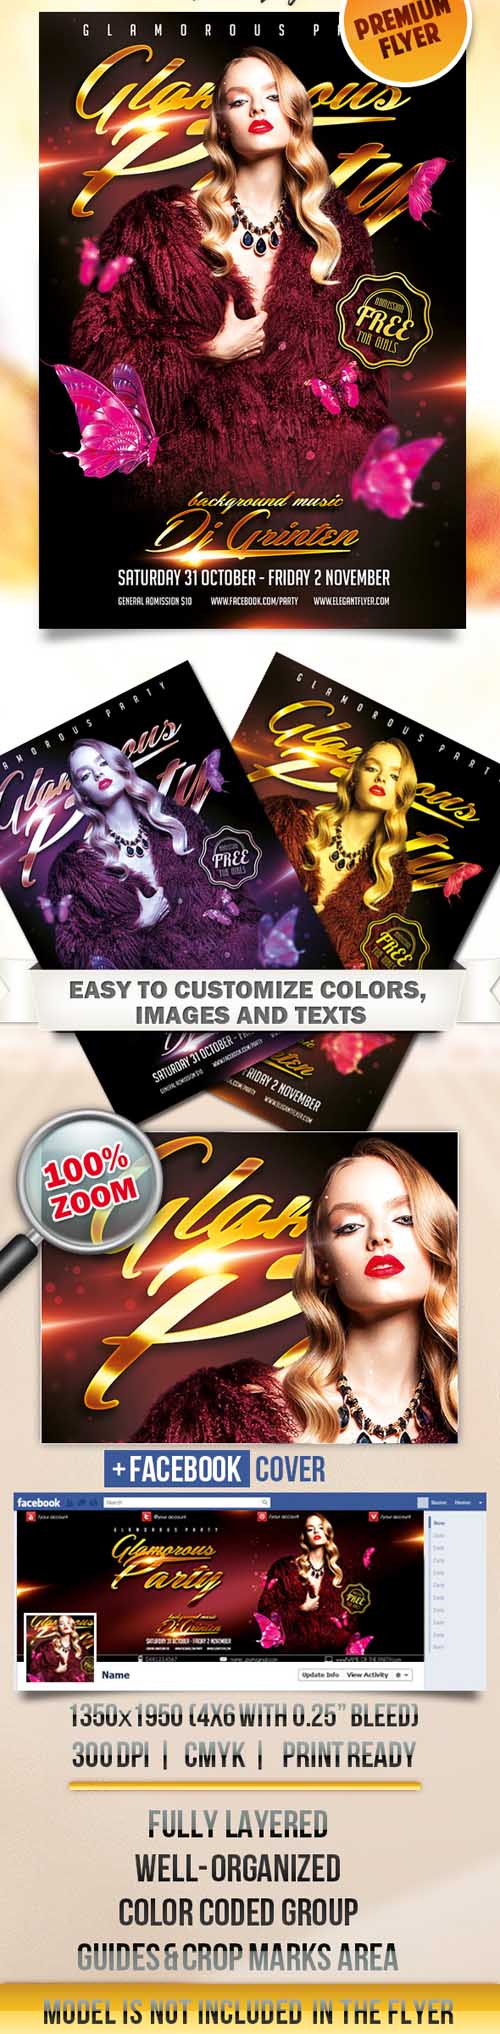 Flyer PSD Template - Glamorous Party + Facebook Cover 3